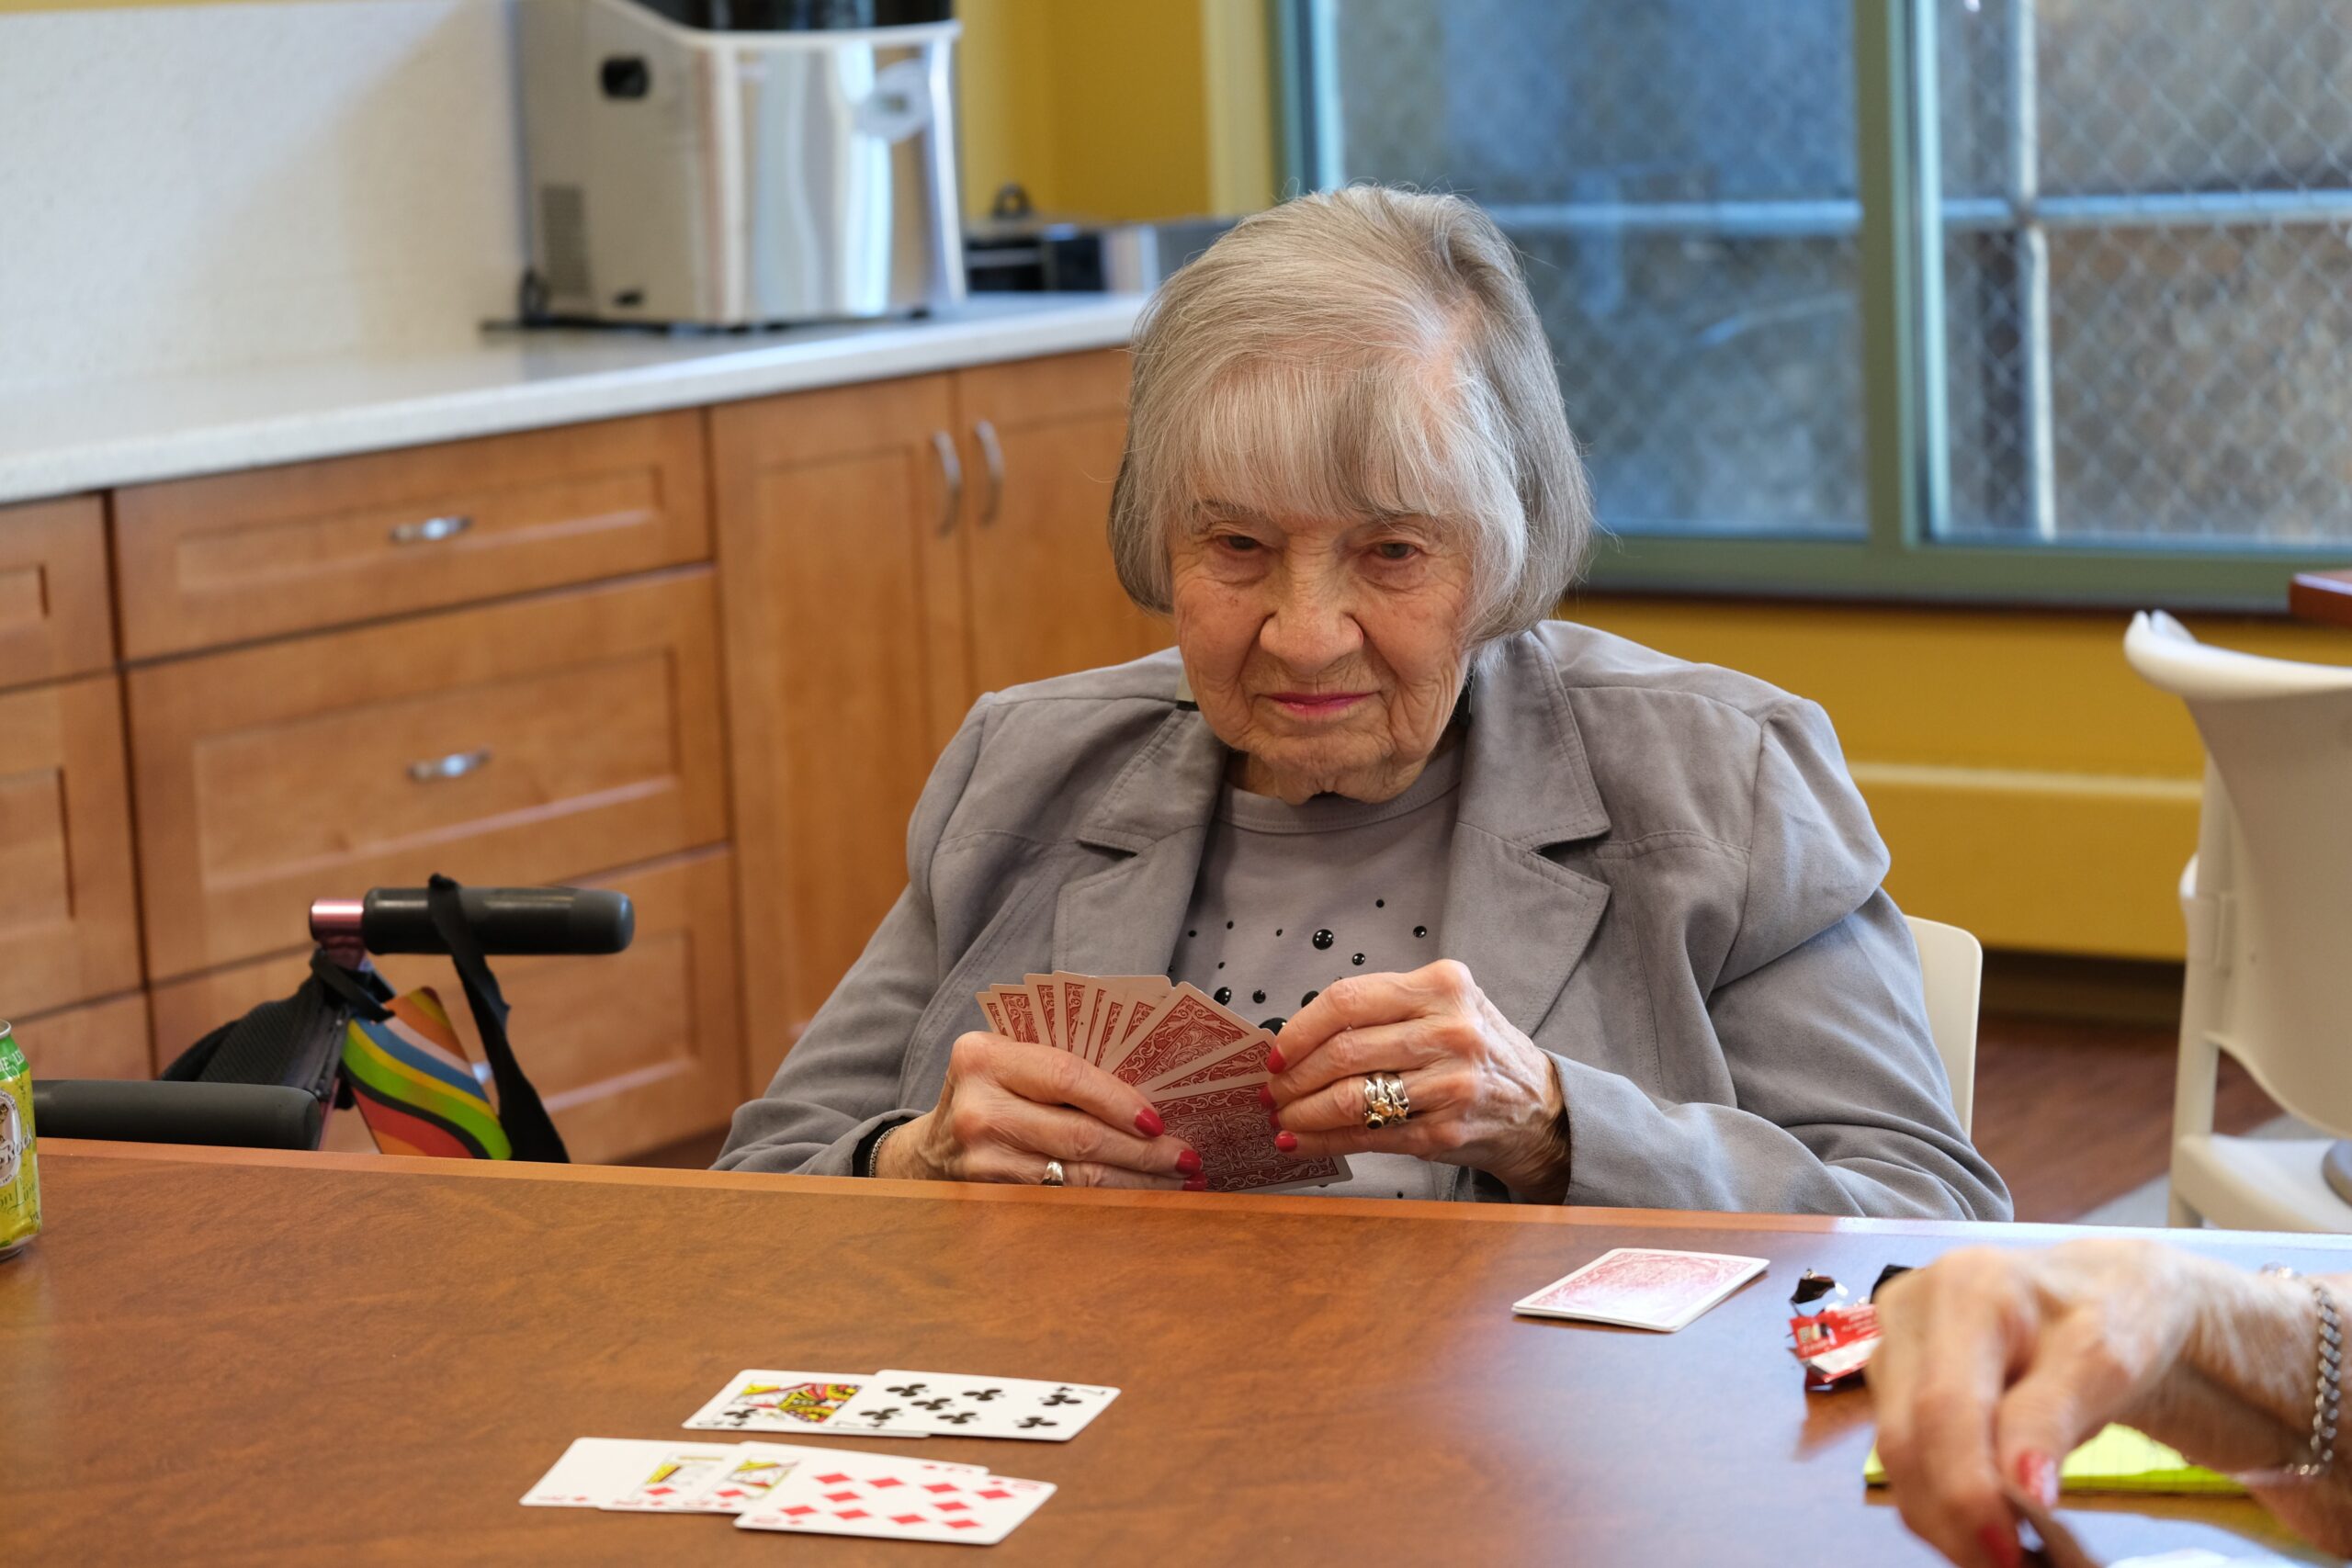 resident at a table with a deck of cards in her hands playing a game with another resident